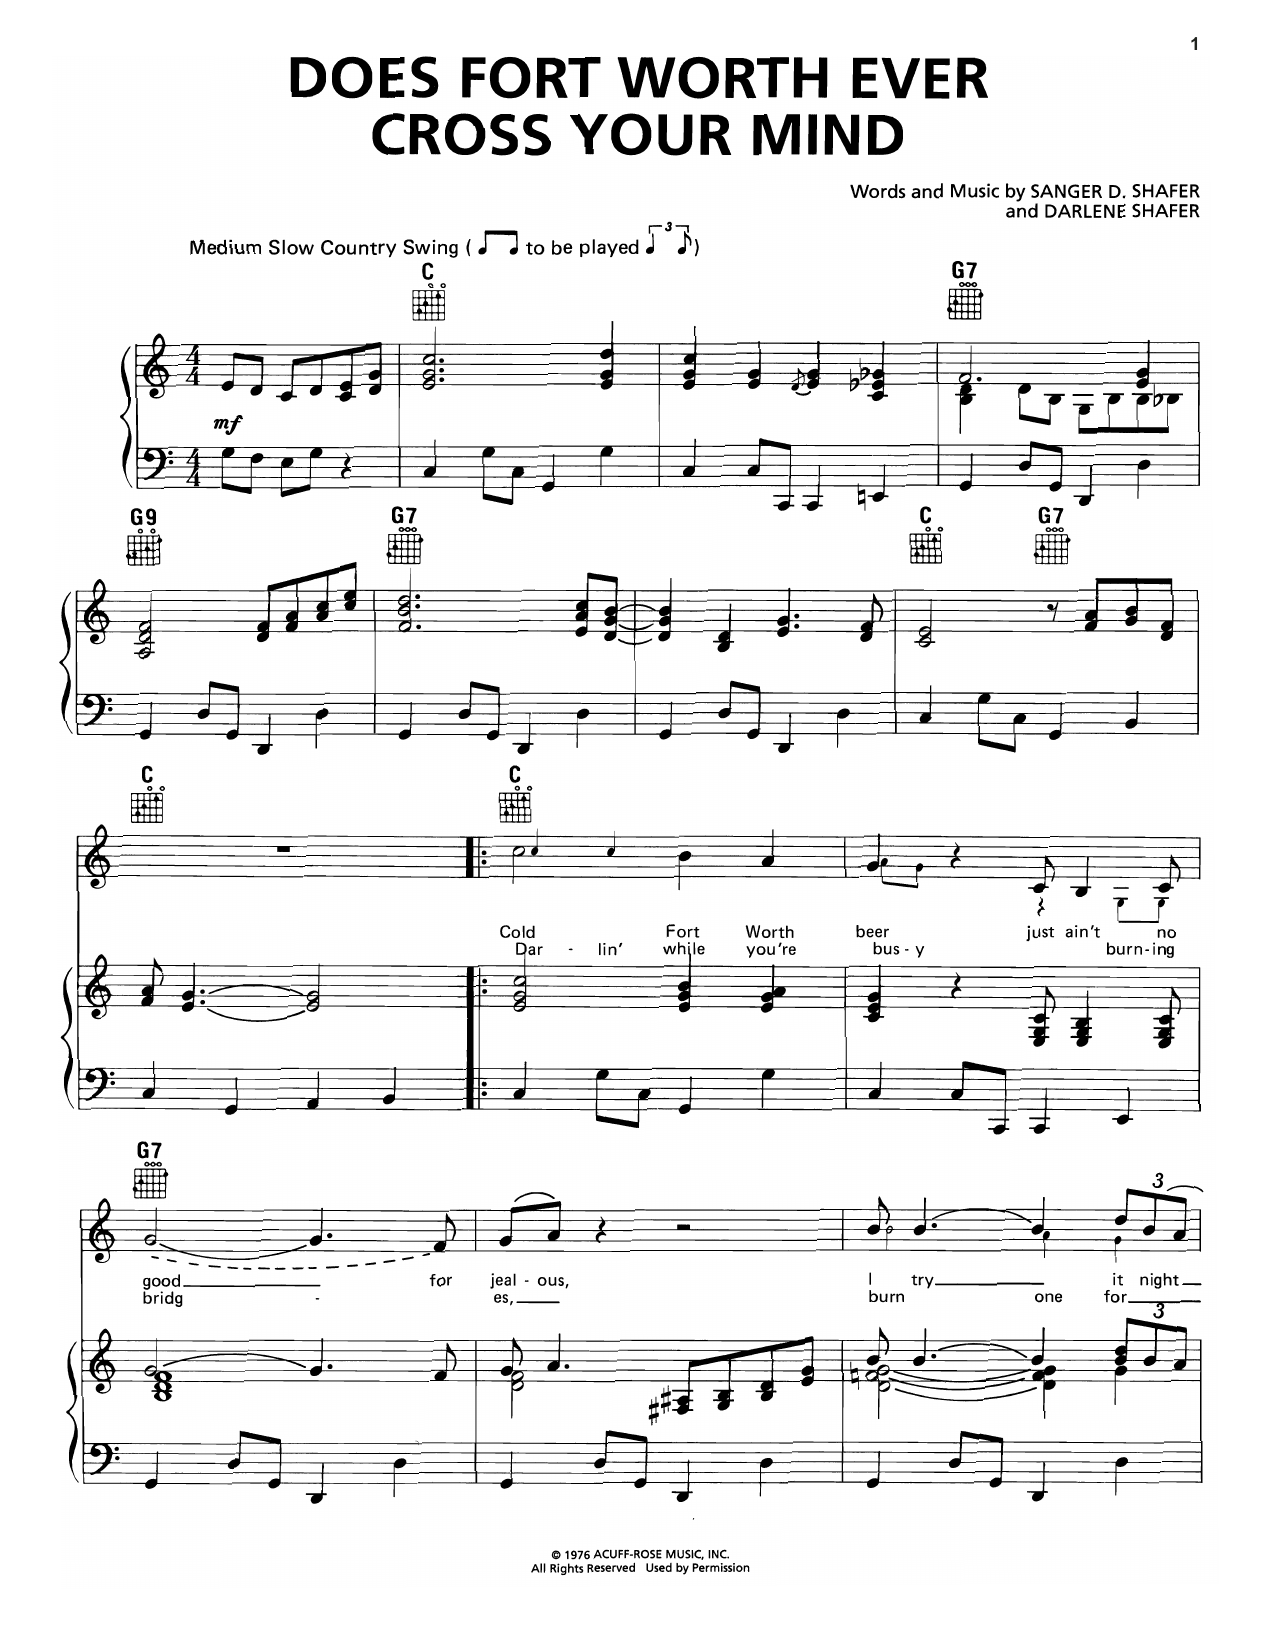 George Strait Does Fort Worth Ever Cross Your Mind sheet music notes and chords. Download Printable PDF.